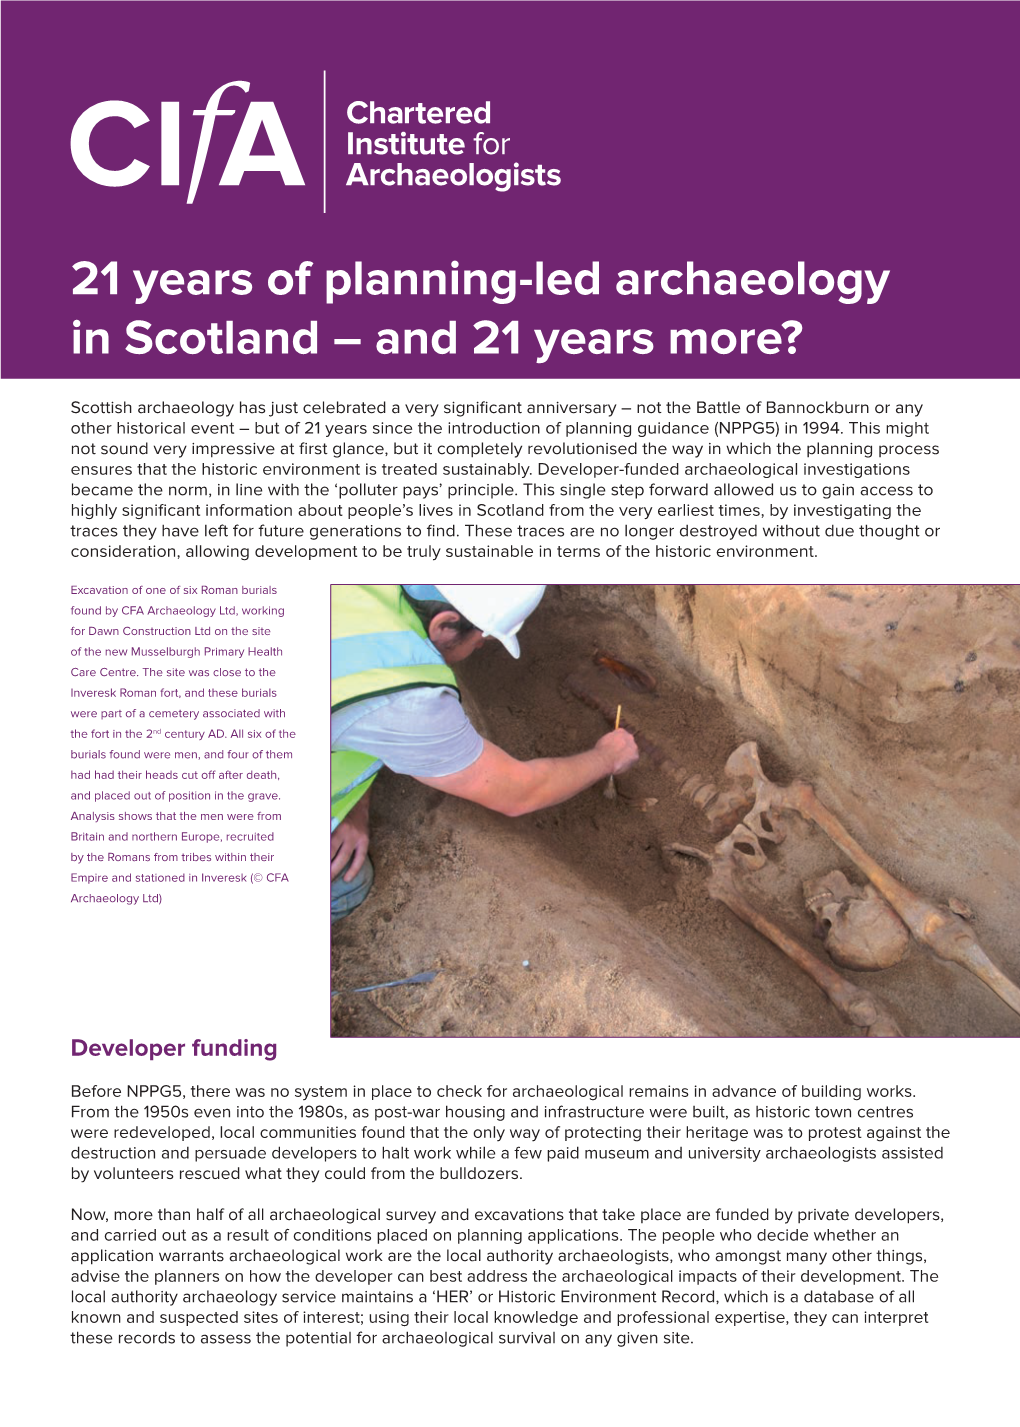 21 Years of Planning-Led Archaeology in Scotland – and 21 Years More?